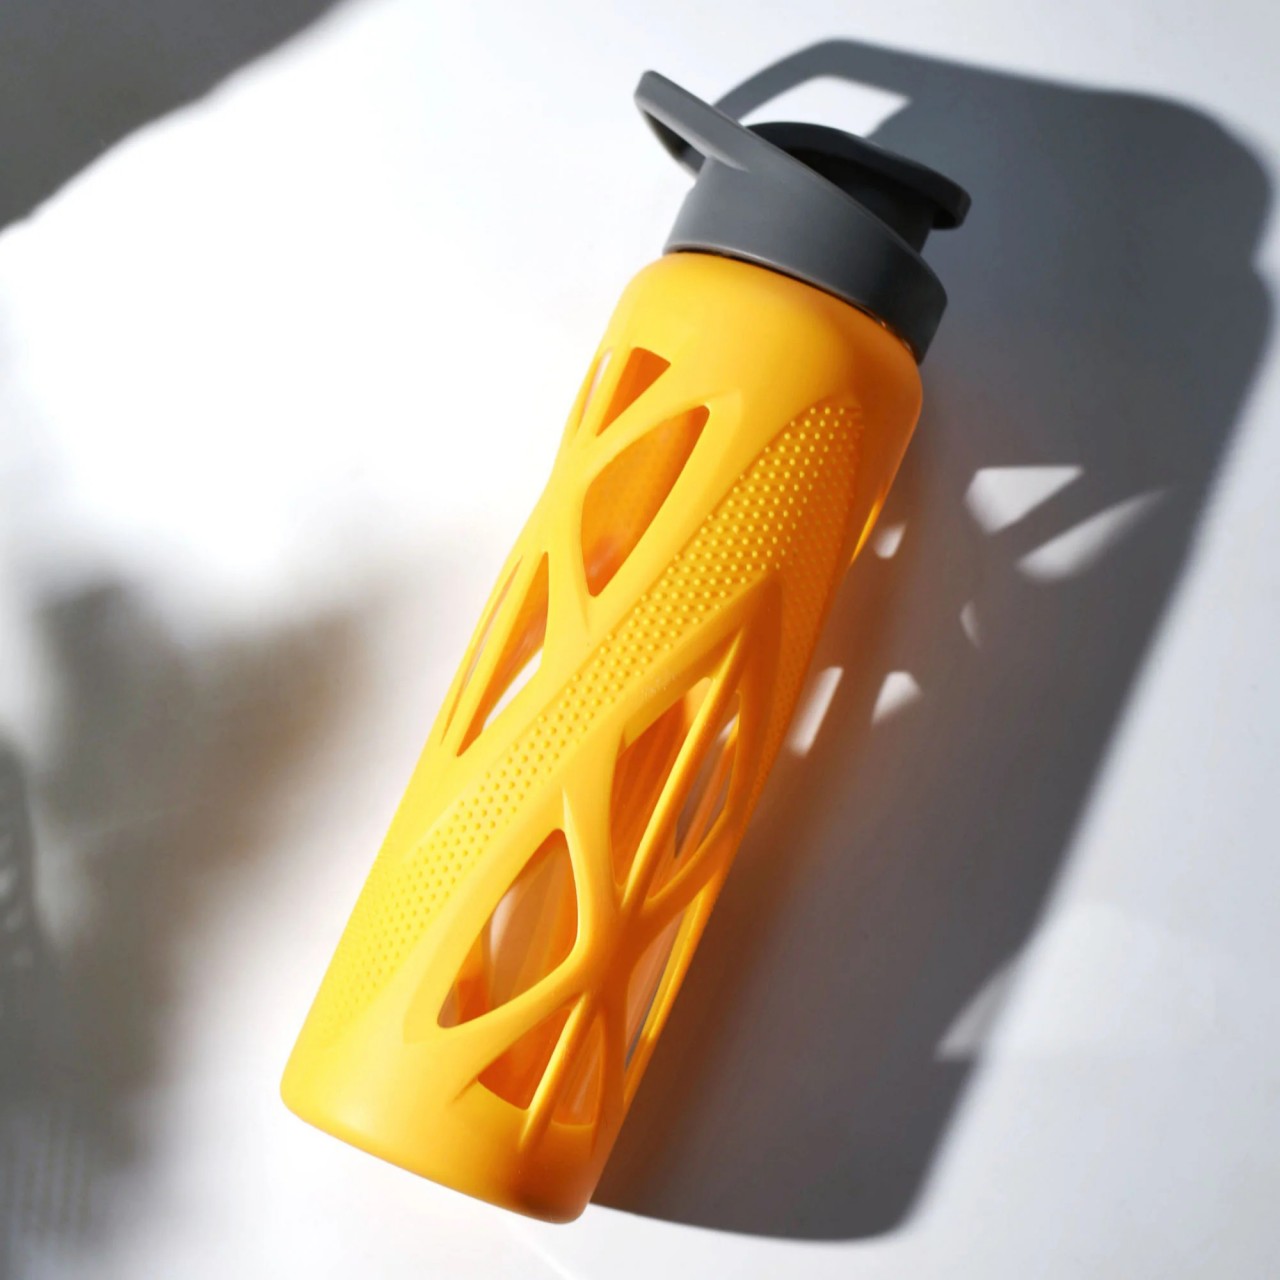 Borosilicate Glass Water Bottle with Silicone Sleeve